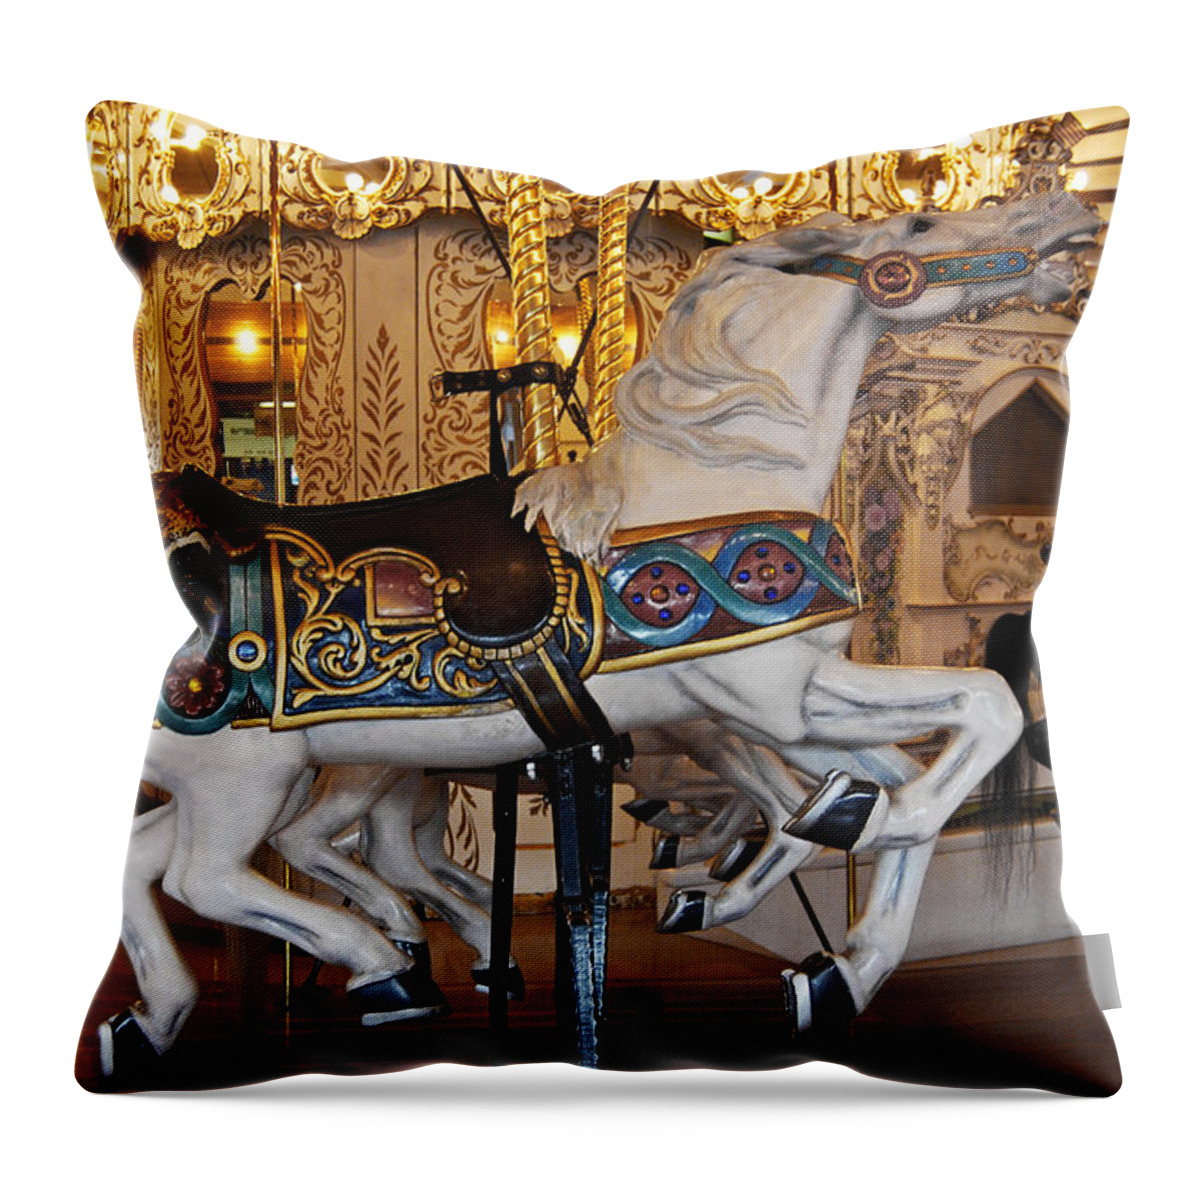 Carousel Horses Throw Pillow featuring the photograph Ready 2 Ride II by Jani Freimann